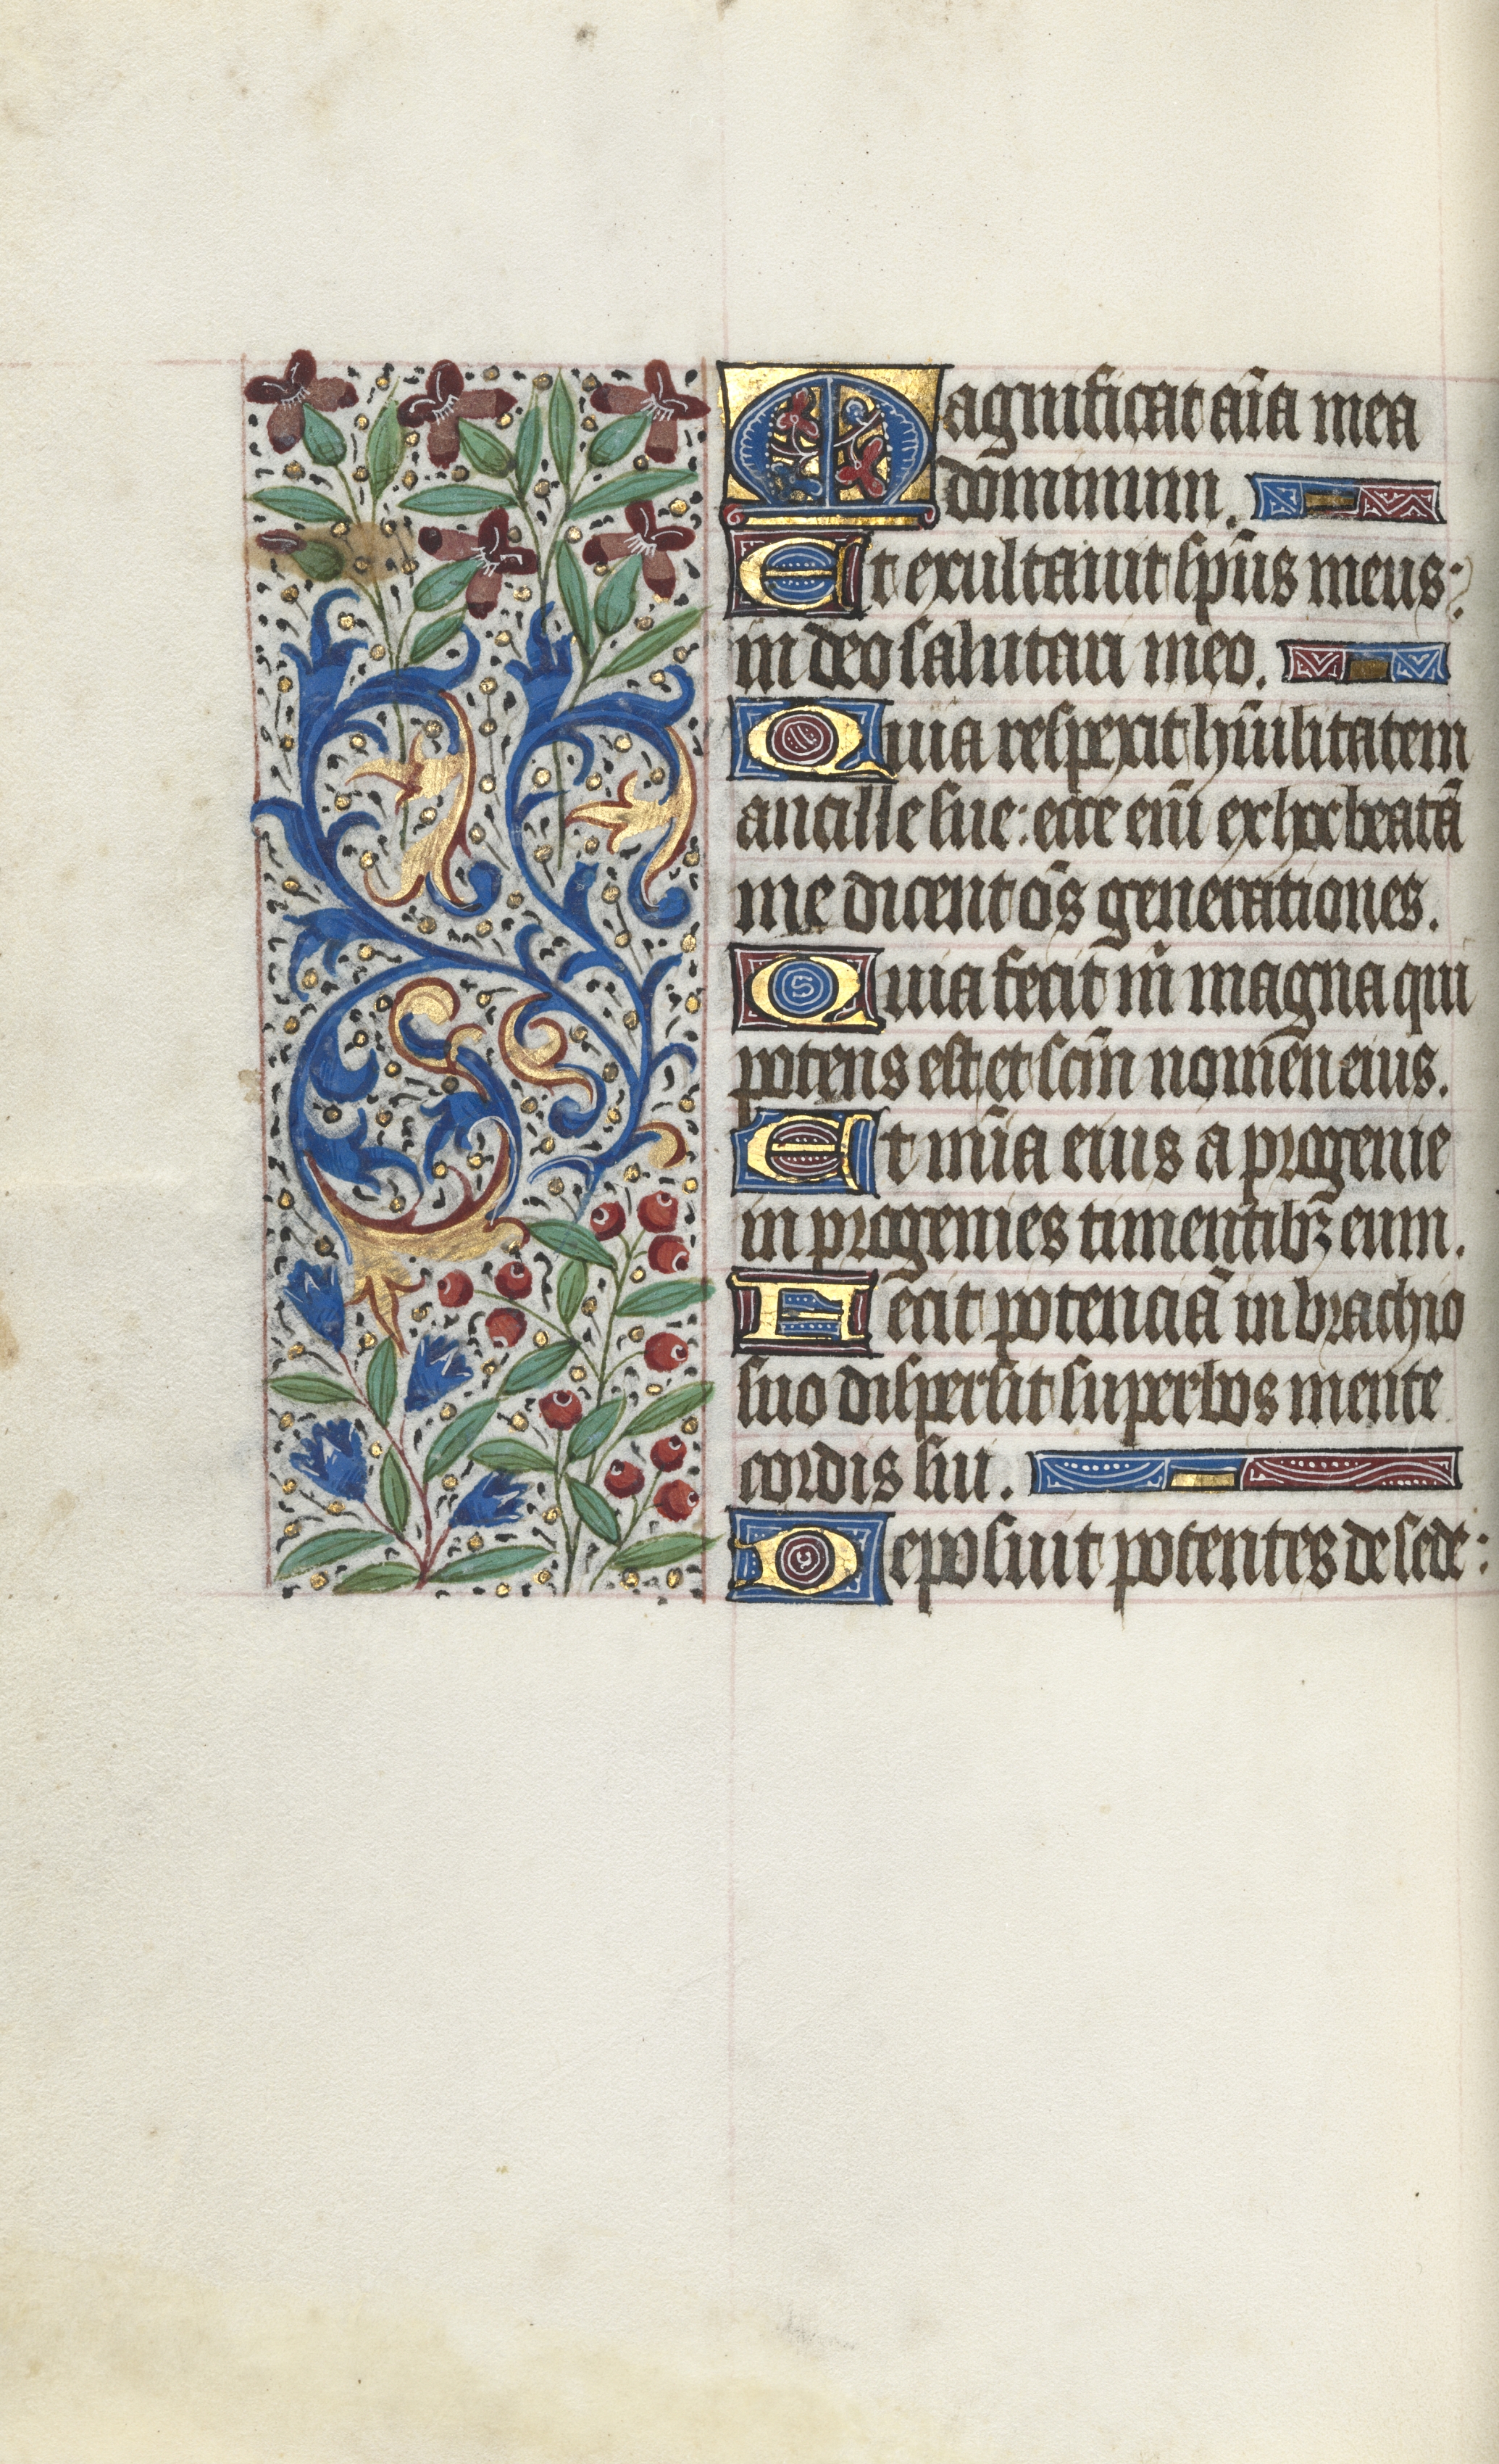 Book of Hours (Use of Rouen): fol. 107v